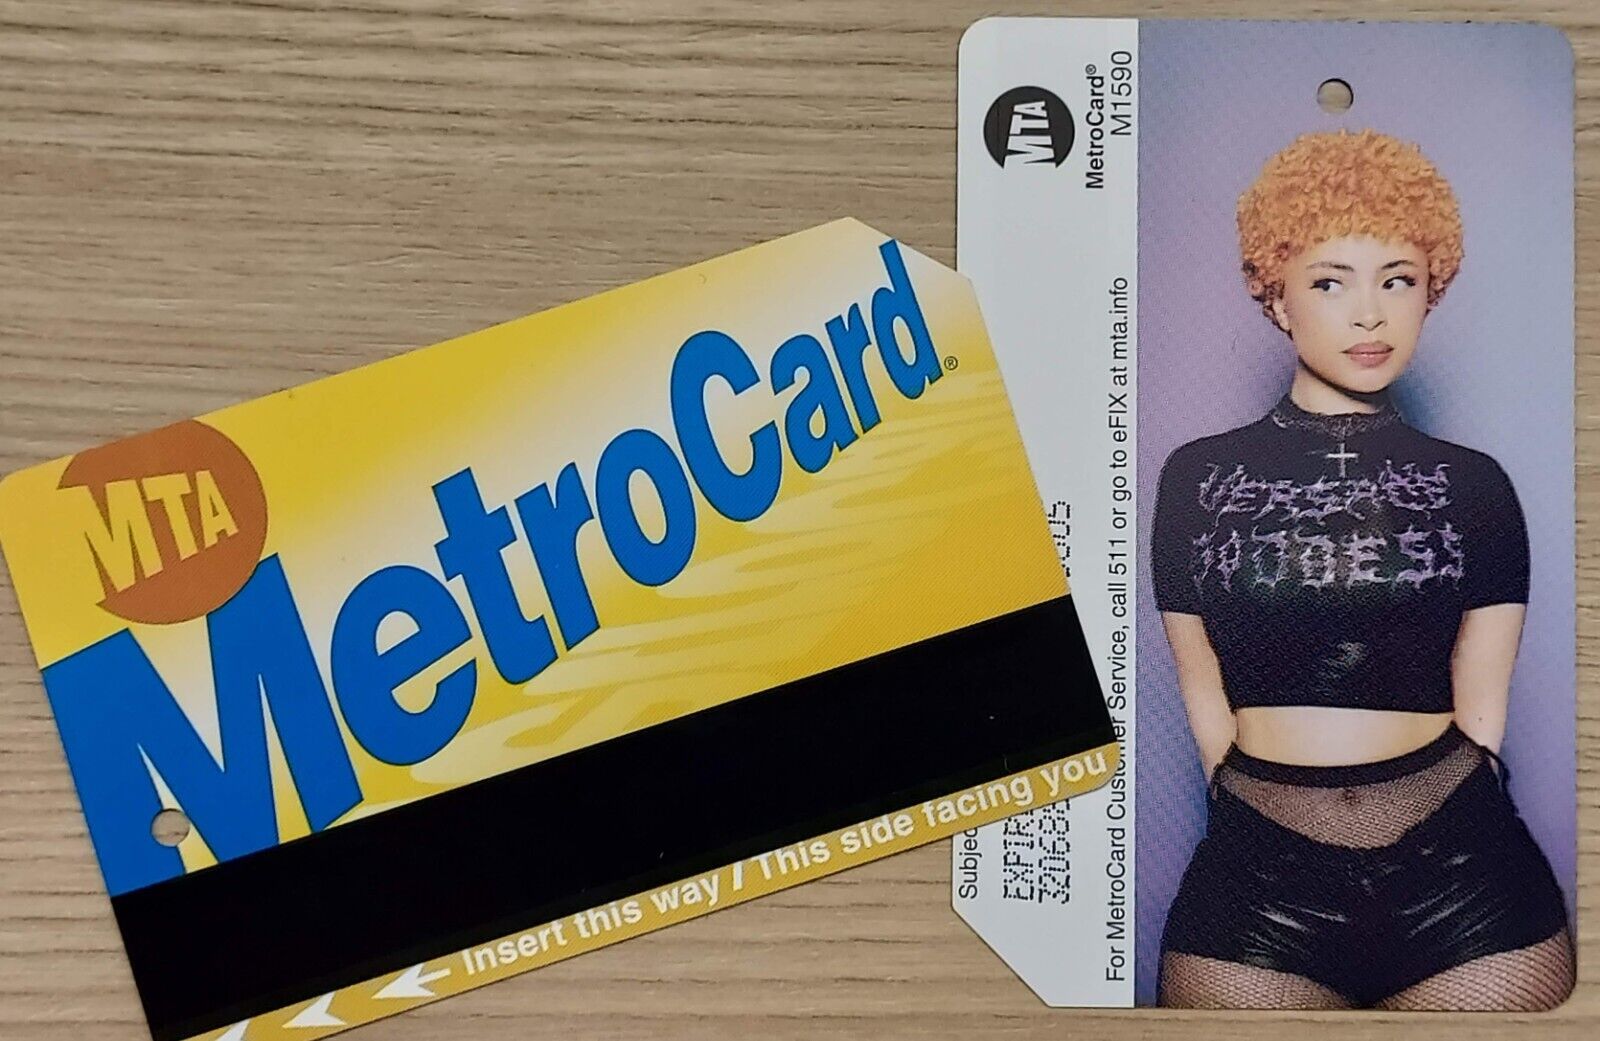 Collectible Limited Edition NYC Metrocard - Ice Spice